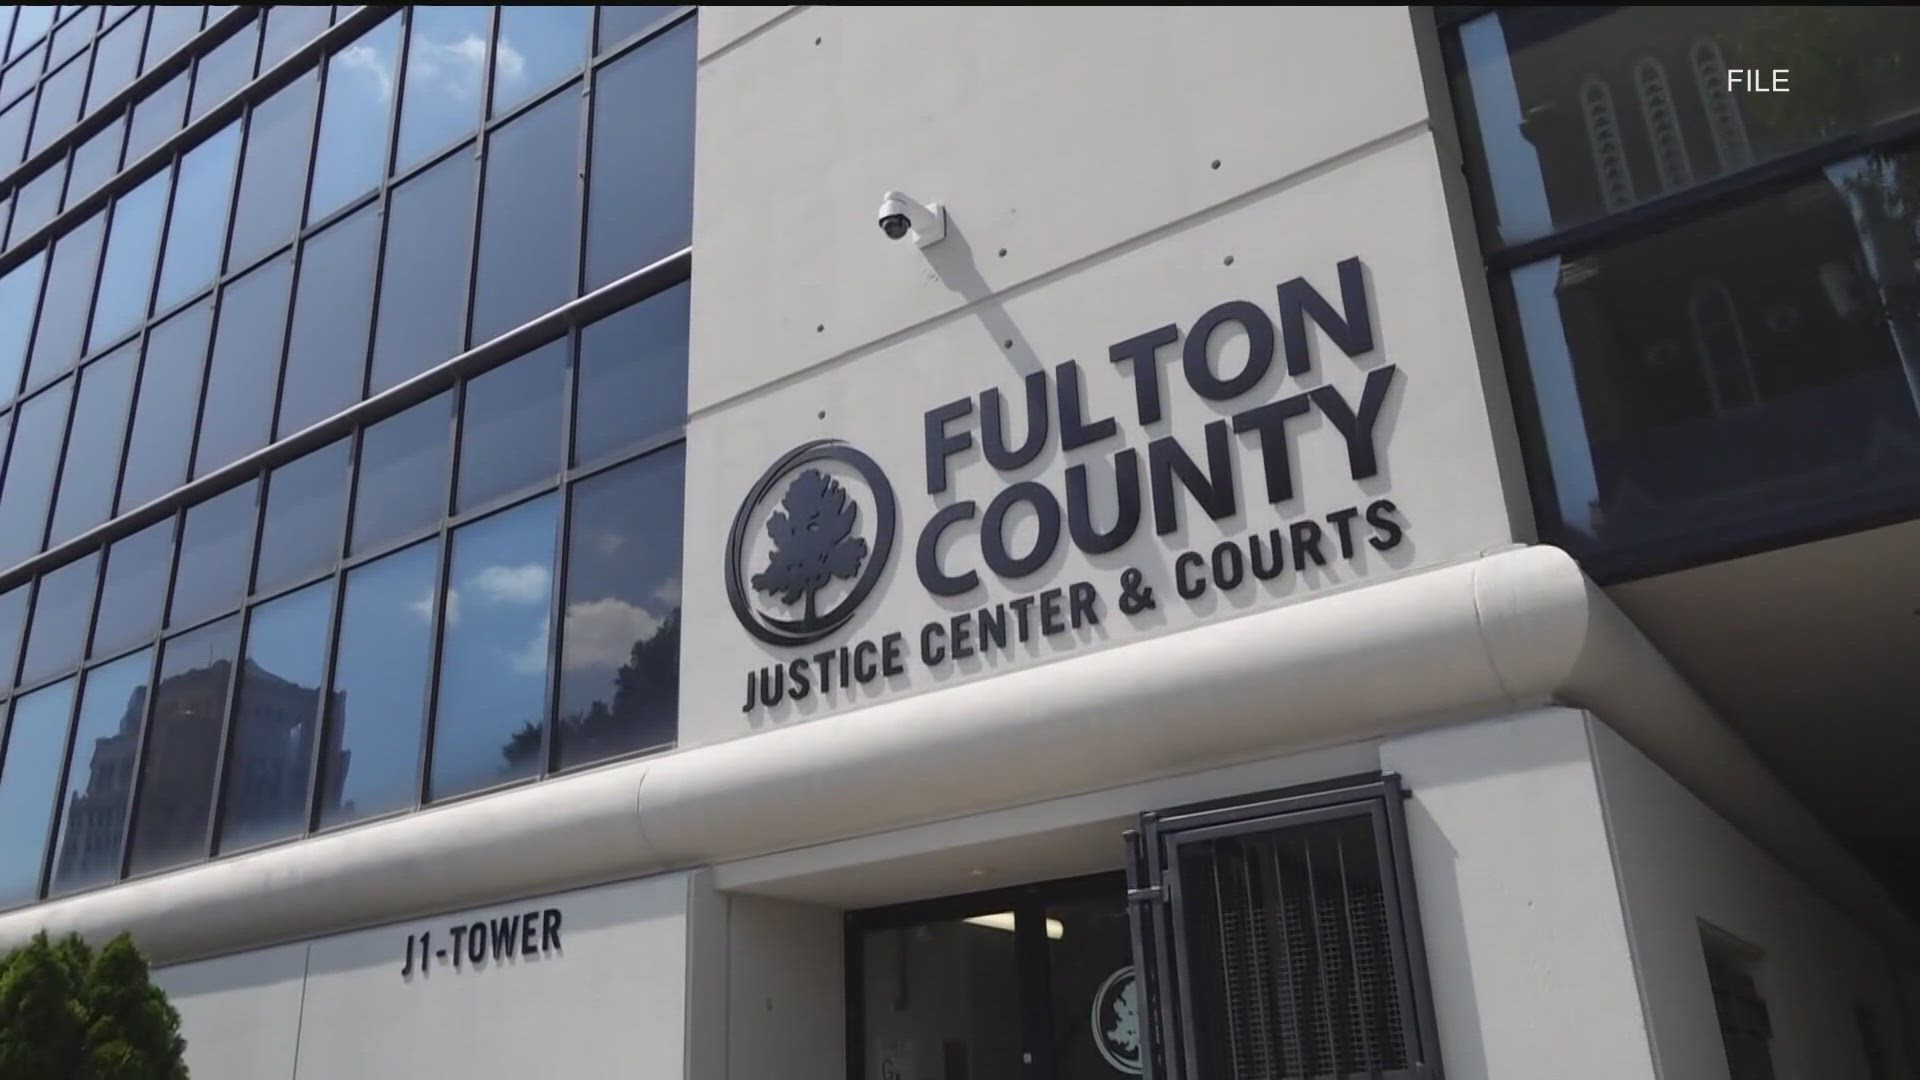 The Fulton County Government says it's still working to get its systems back online.